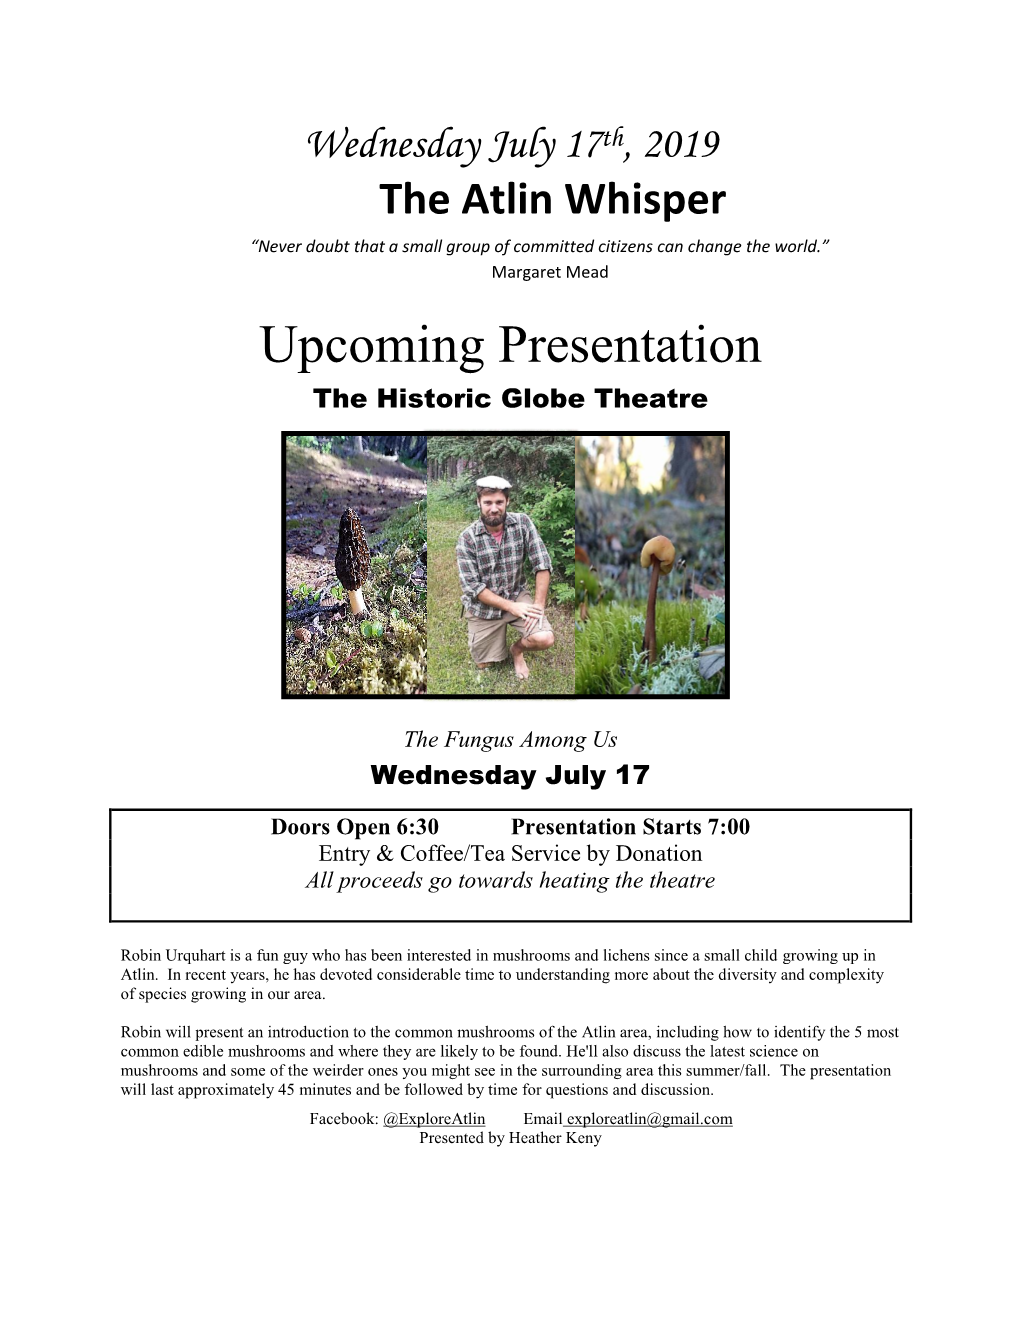 Wednesday July 17Th, 2019 the Atlin Whisper “Never Doubt That a Small Group of Committed Citizens Can Change the World.” Margaret Mead